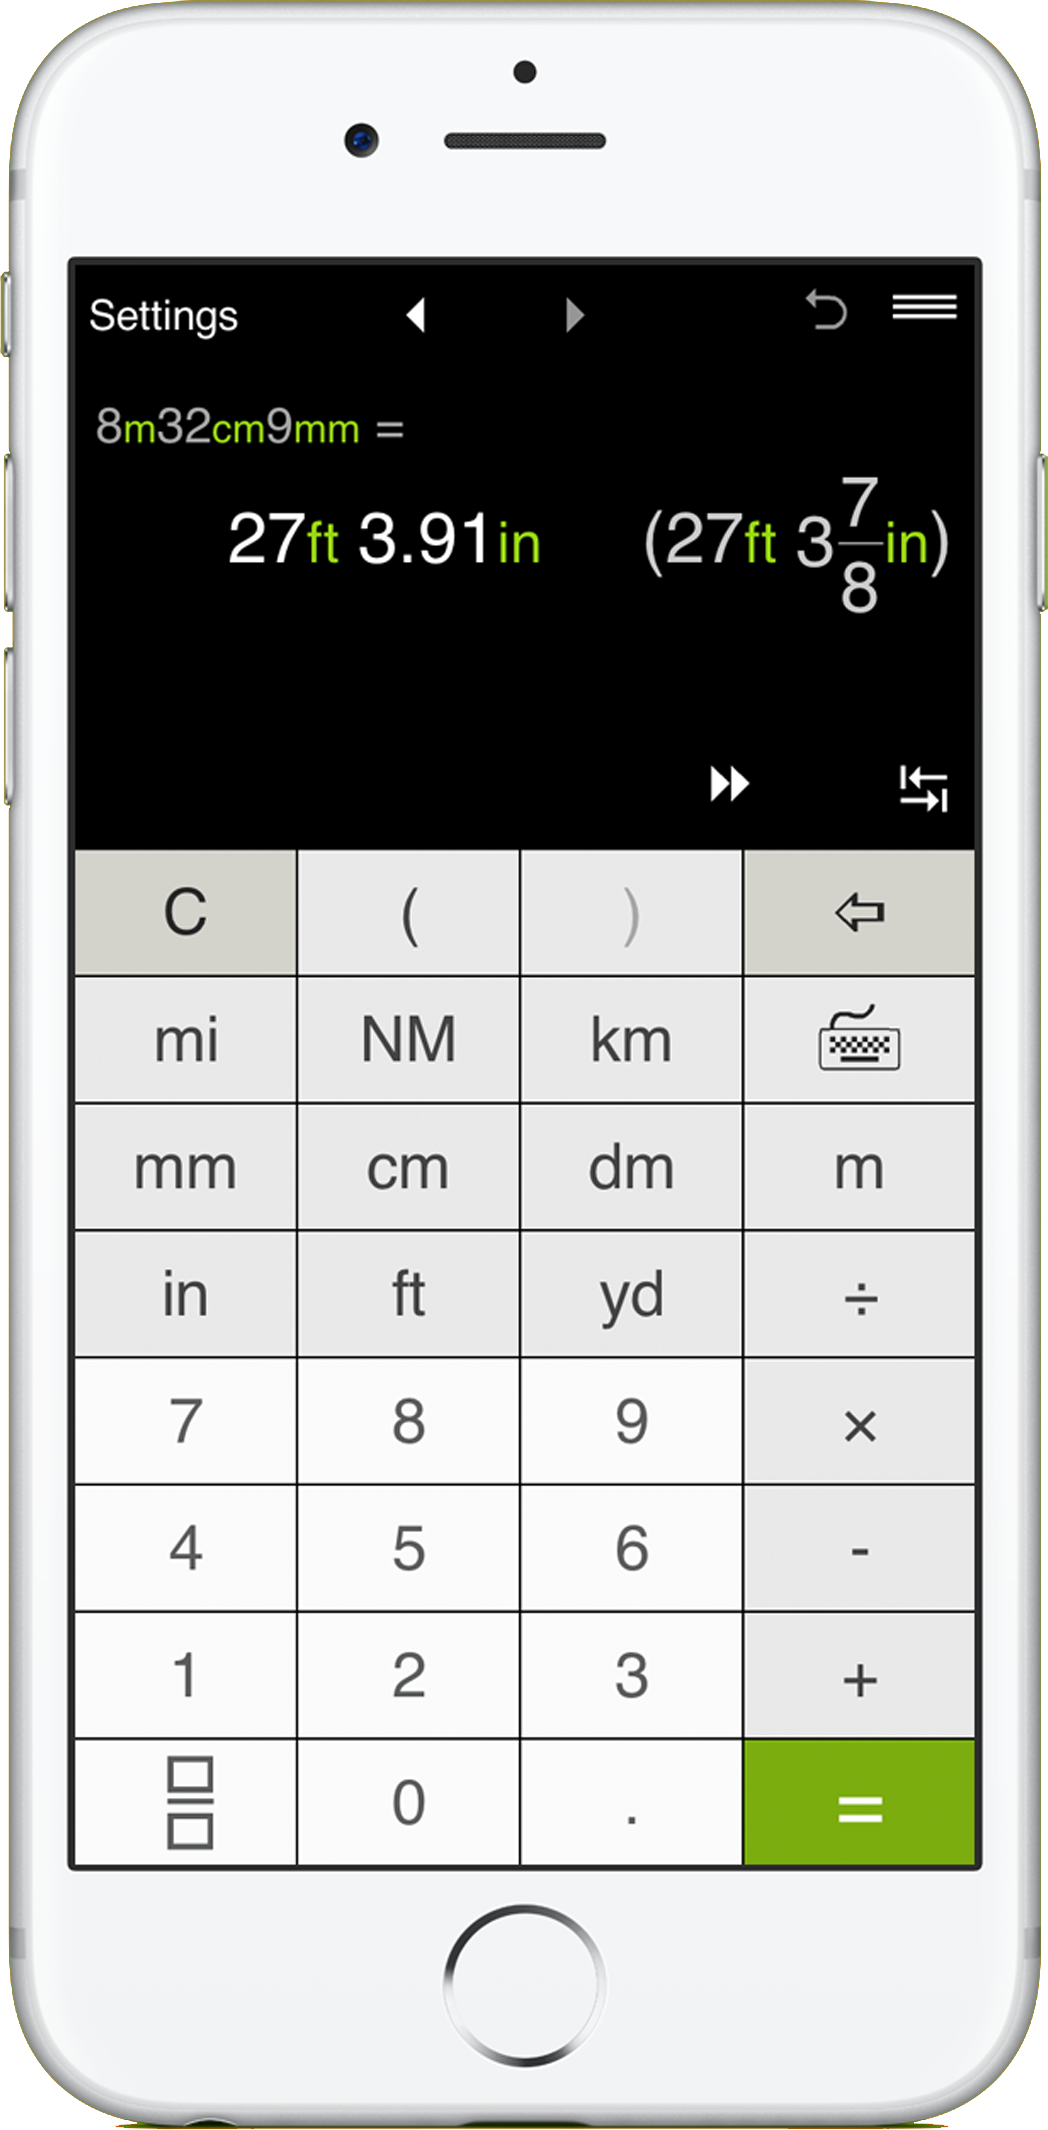 unit-calculator-to-work-in-and-convert-between-standard-and-metric-units